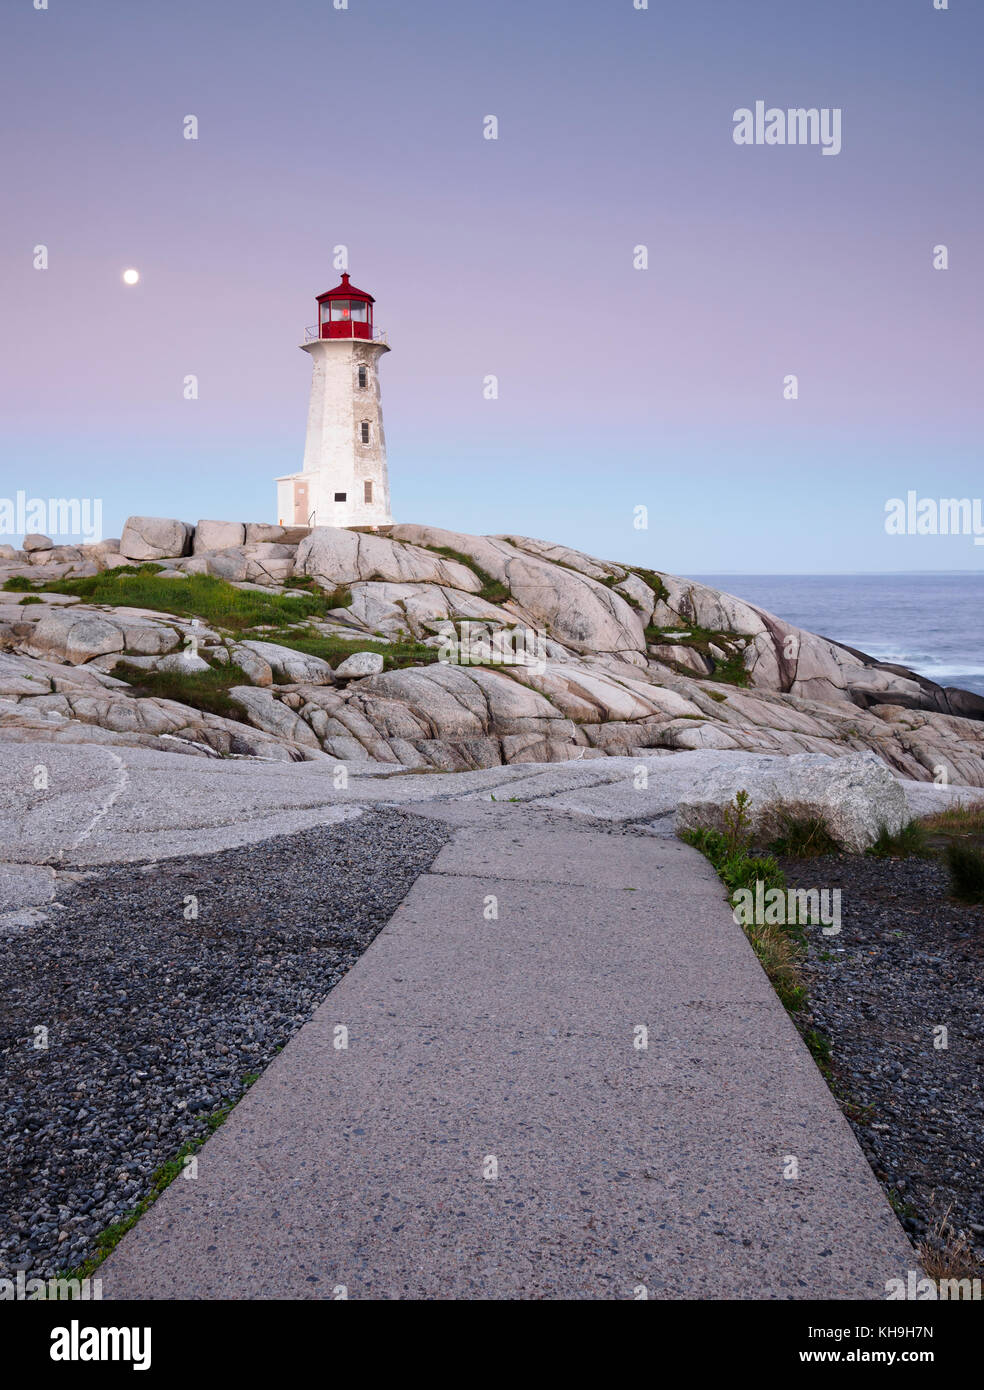 Lighthouse and granite rock formations at Peggy’s Cove, Nova Scotia Stock Photo